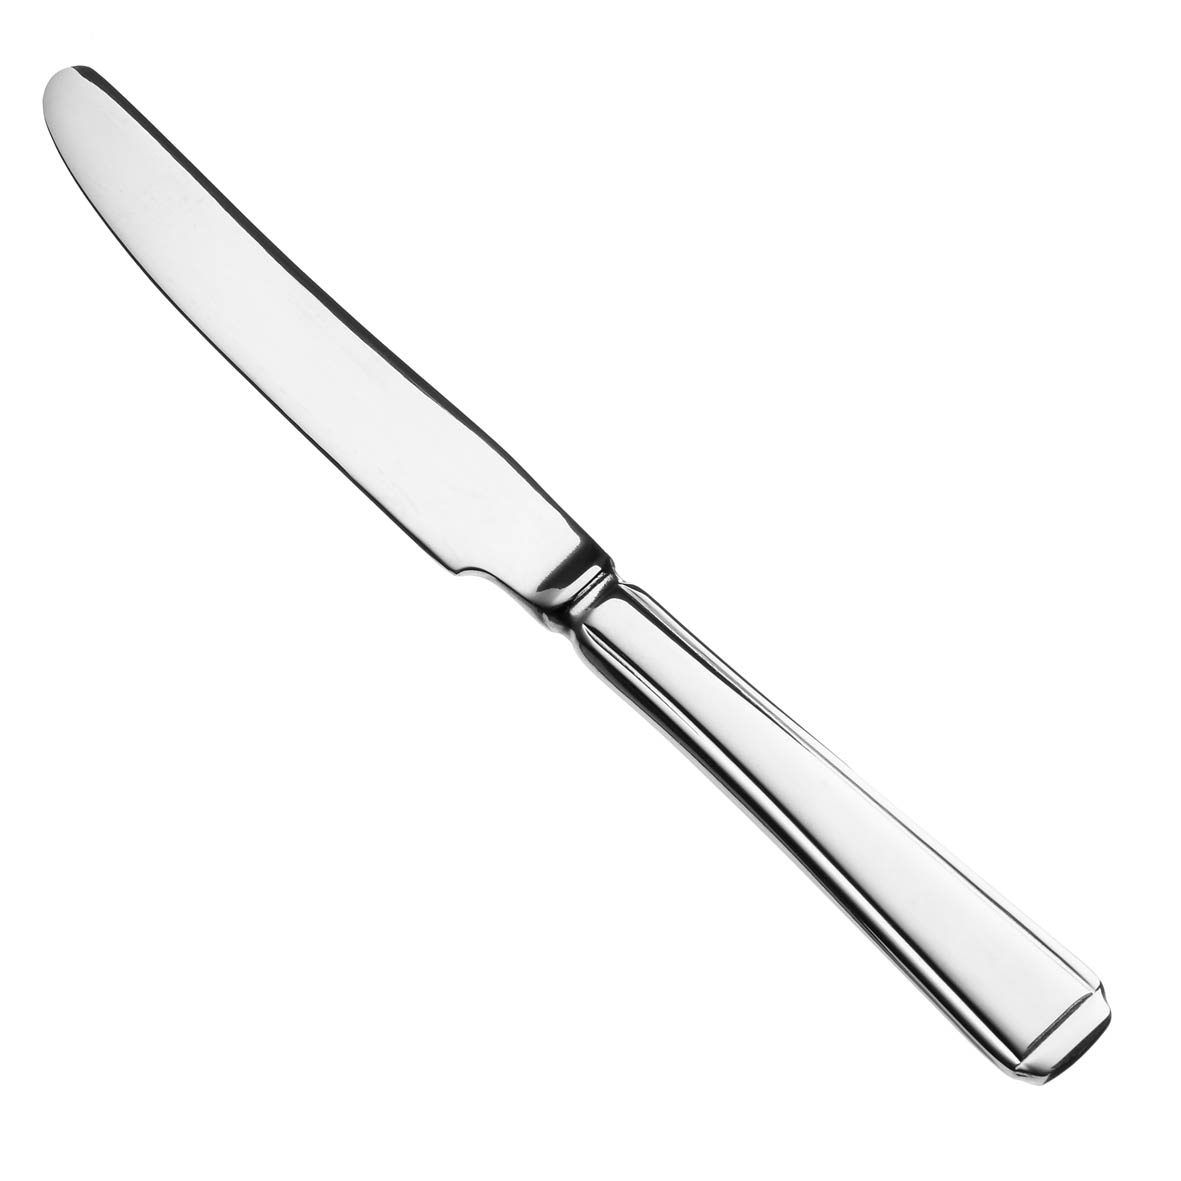 Knife clipart image 